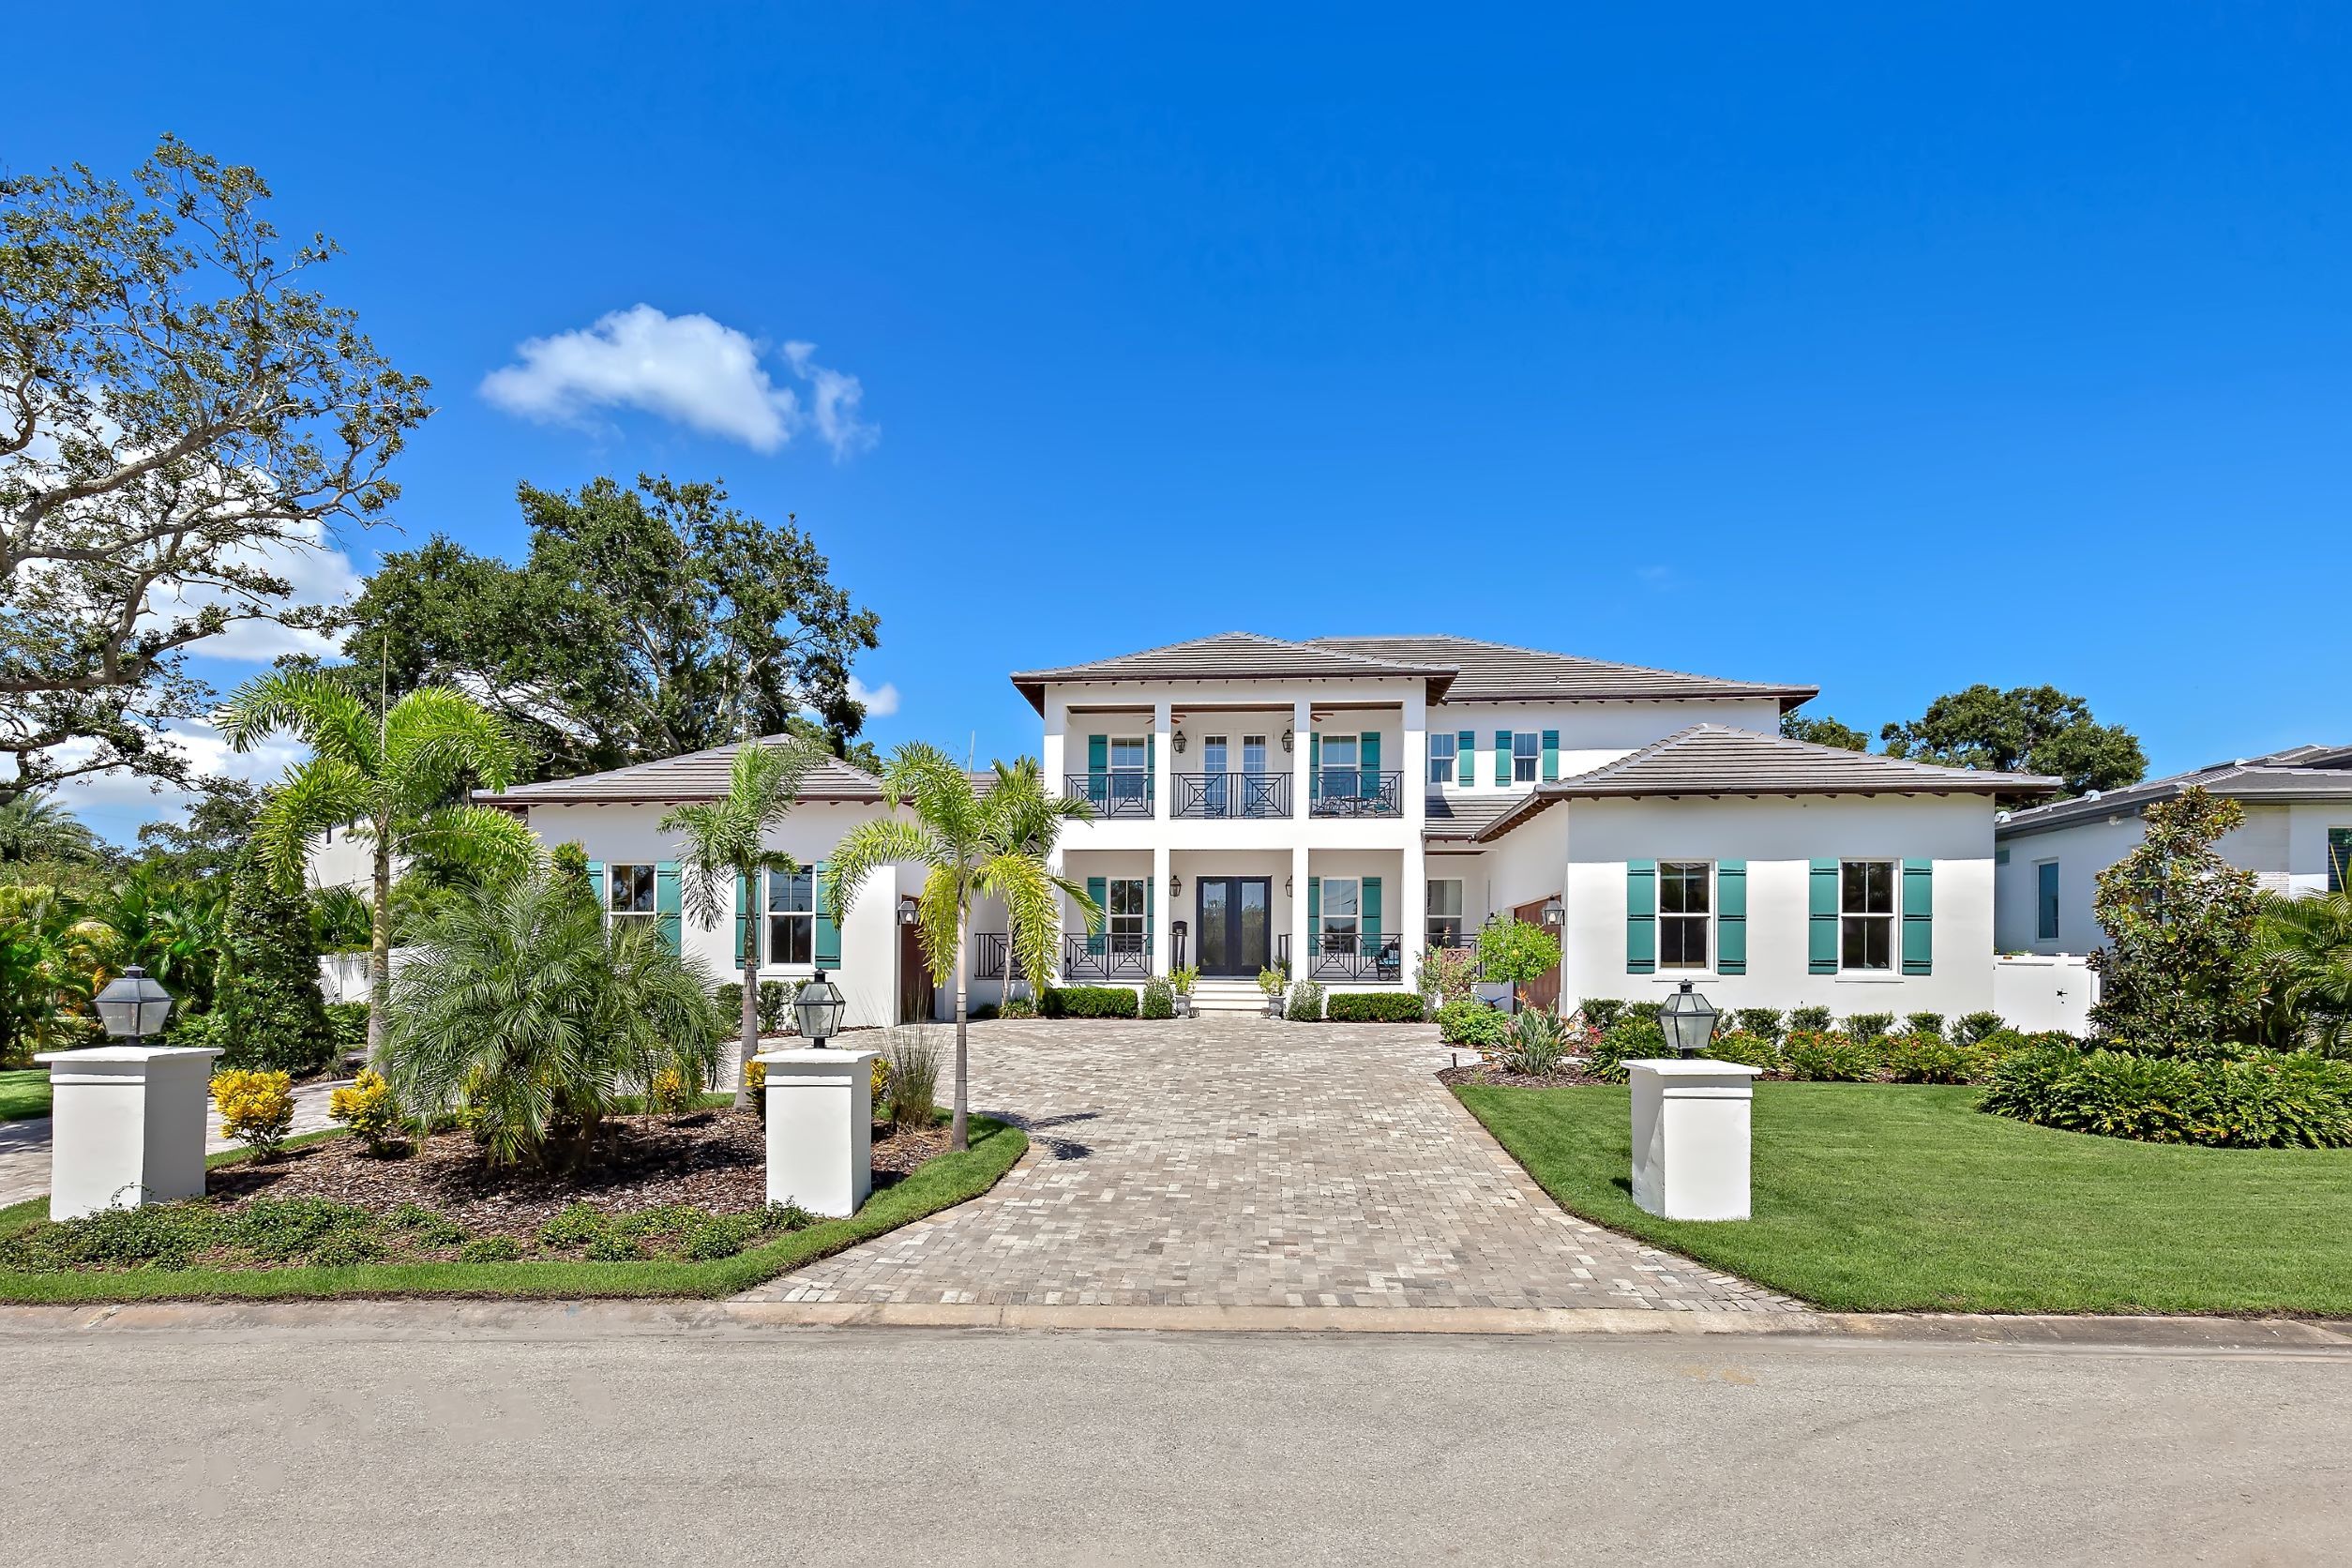 Smith signature real estate luxury homes tampa bay st pete fl